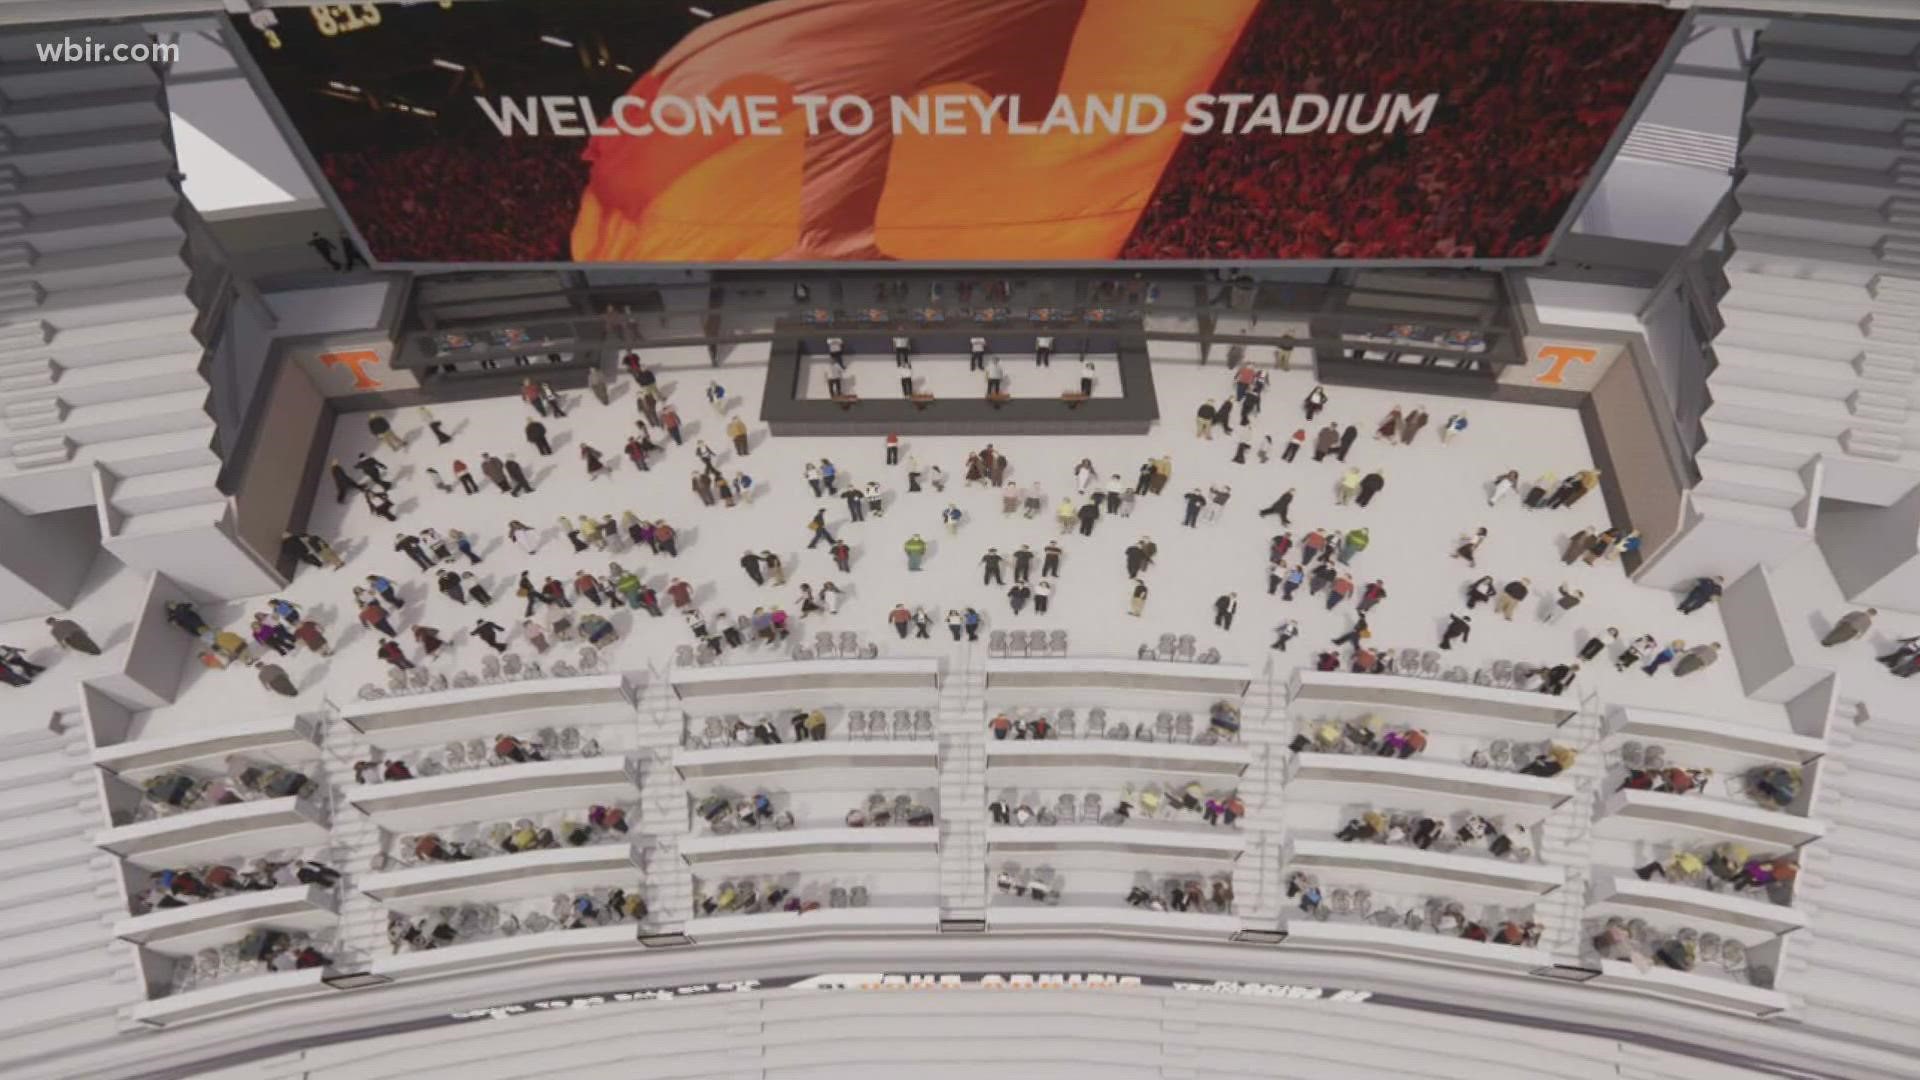 UT Athletics said that changes are coming for all Vols fans, with several improvements to Neyland Stadium.